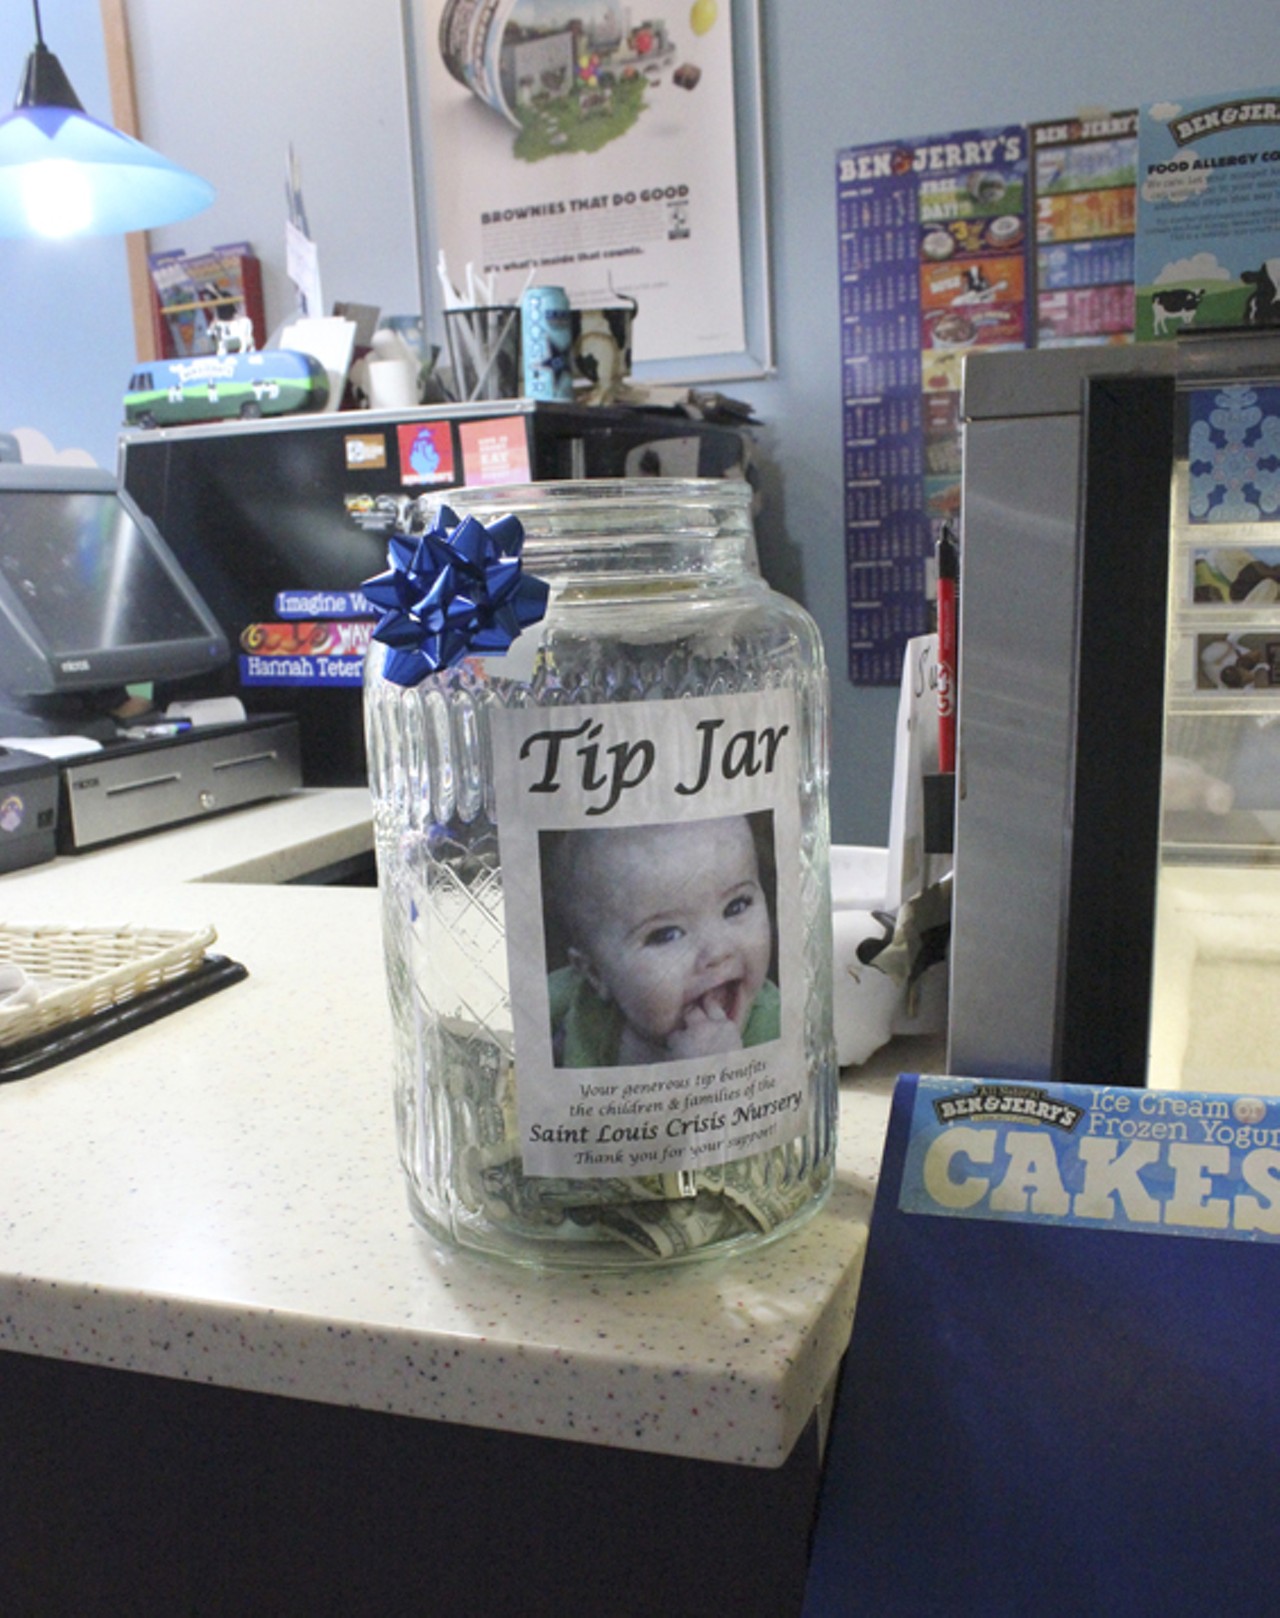 Donations were accepted in a tip jar benefiting St. Louis Crisis Nursery.